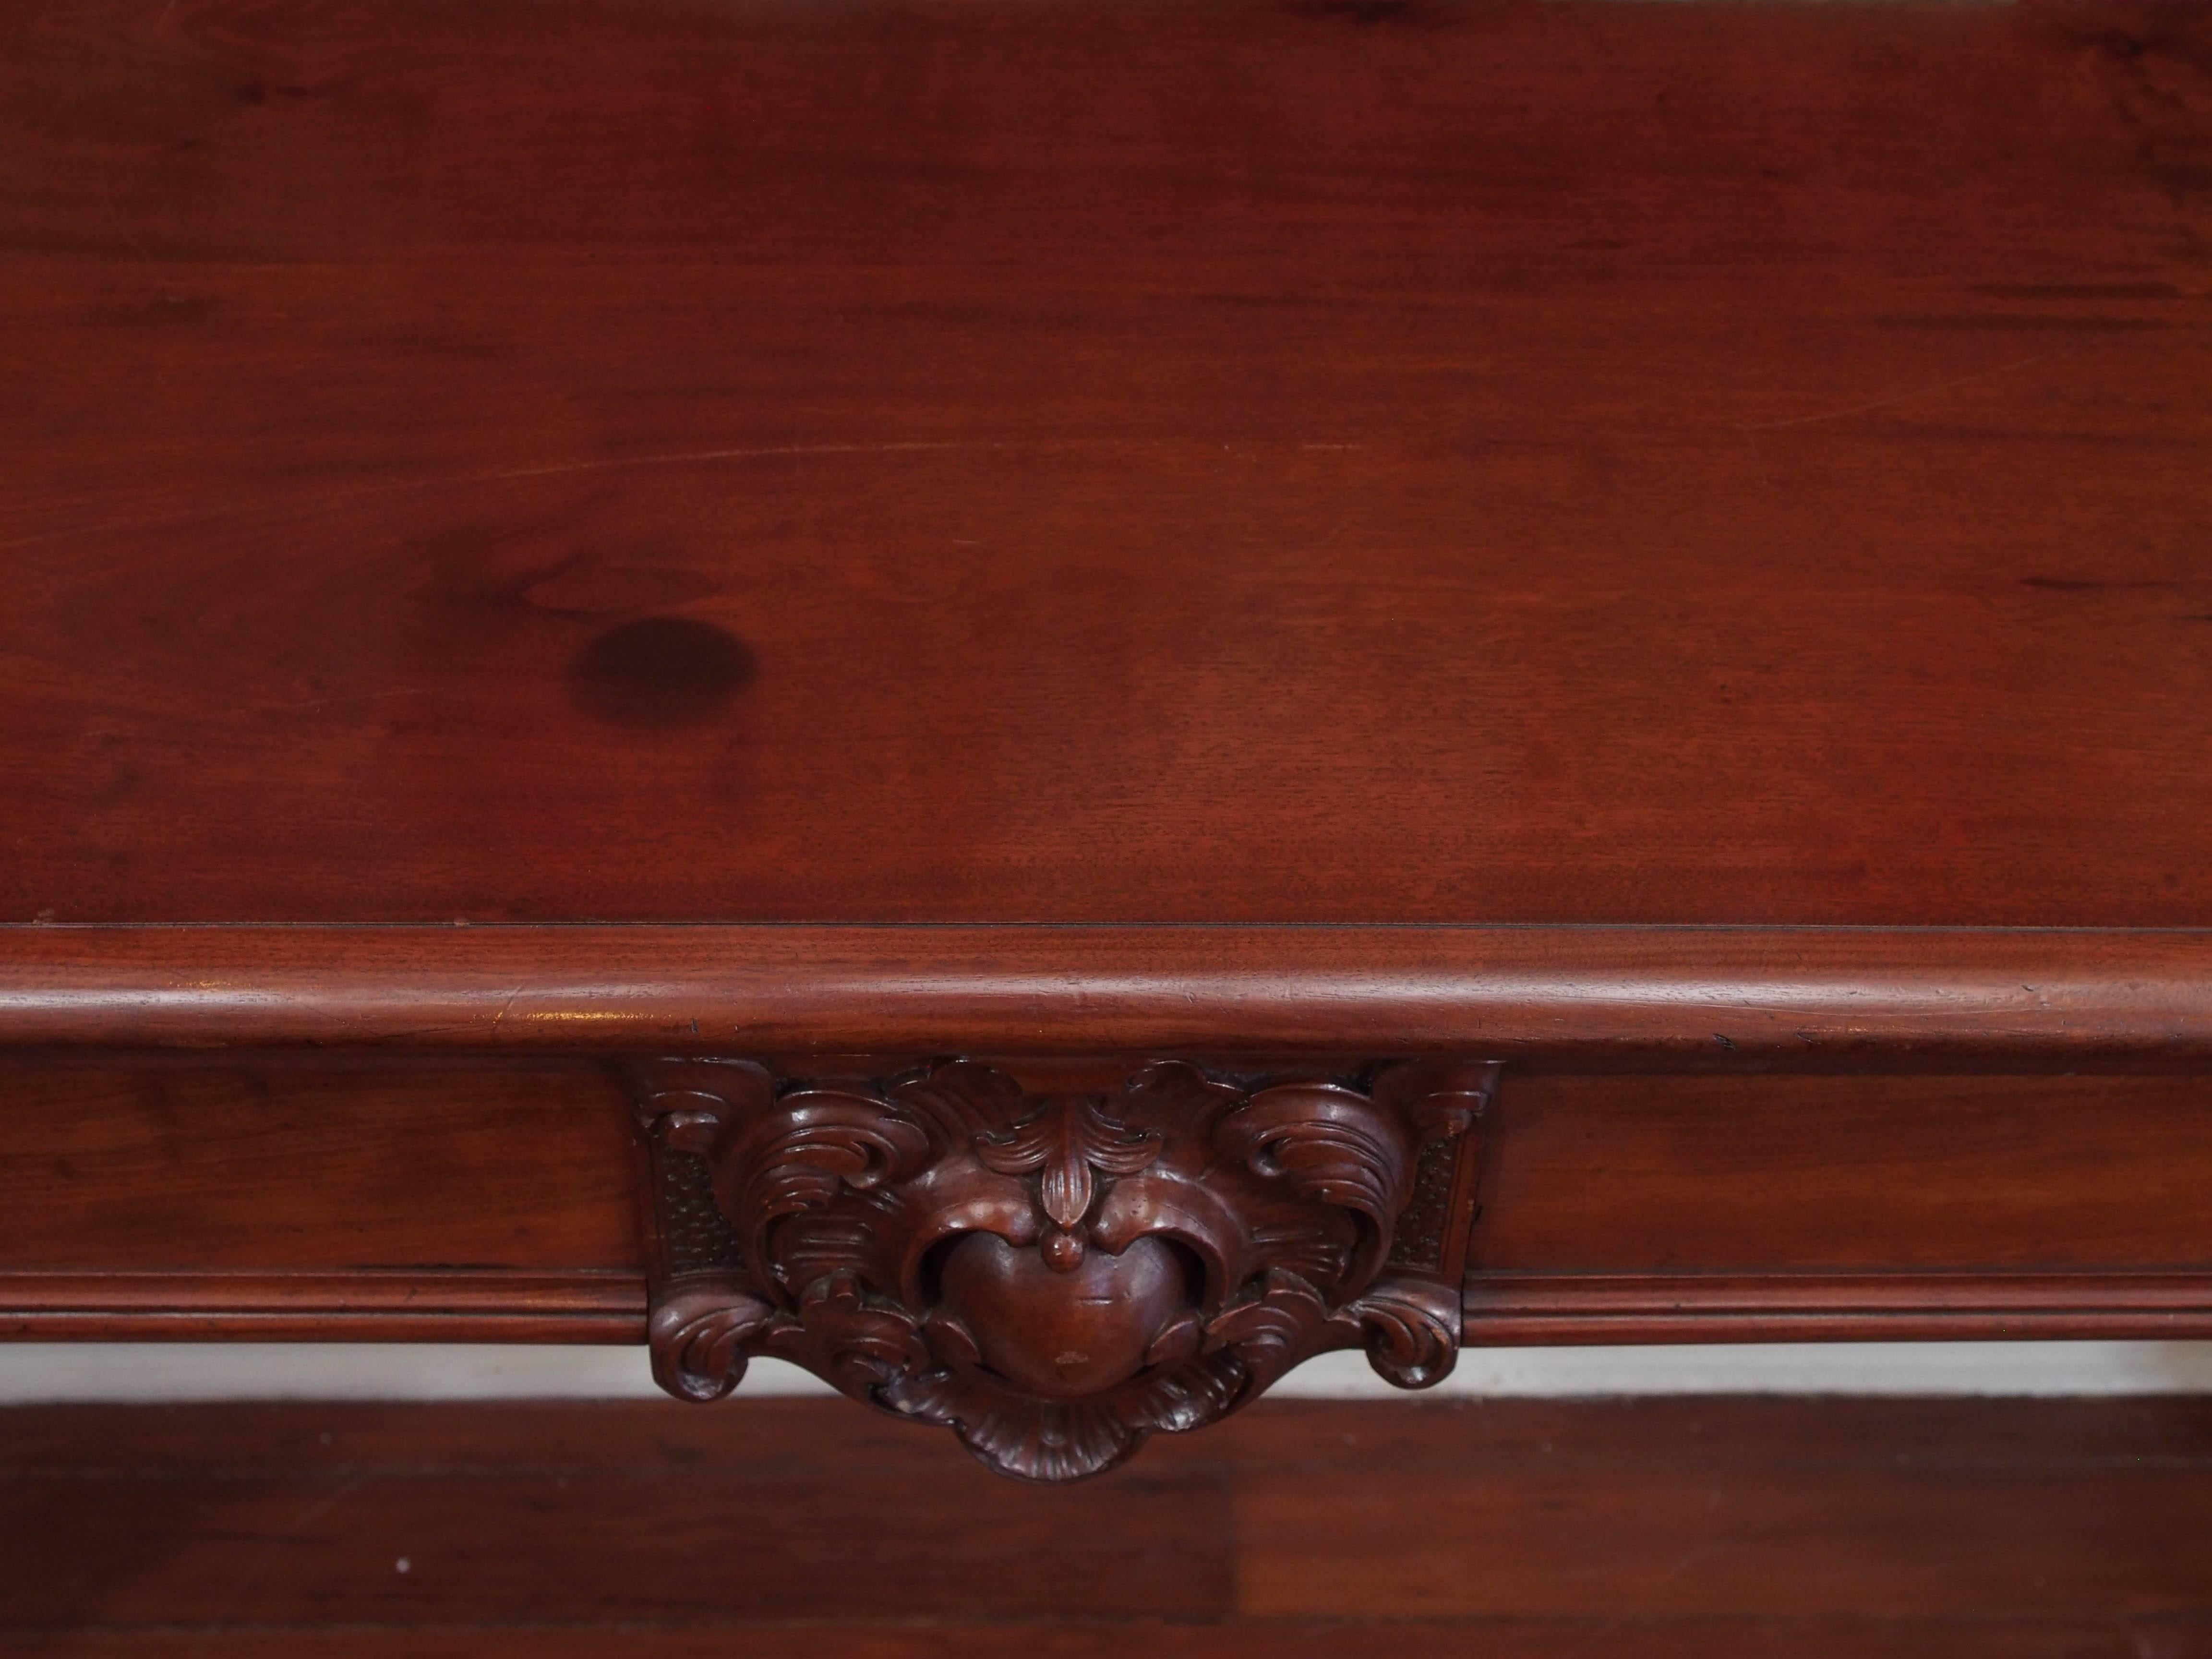 Large William IV mahogany carved serving table with drawers. Exceptionally carved legs and central cartouche.